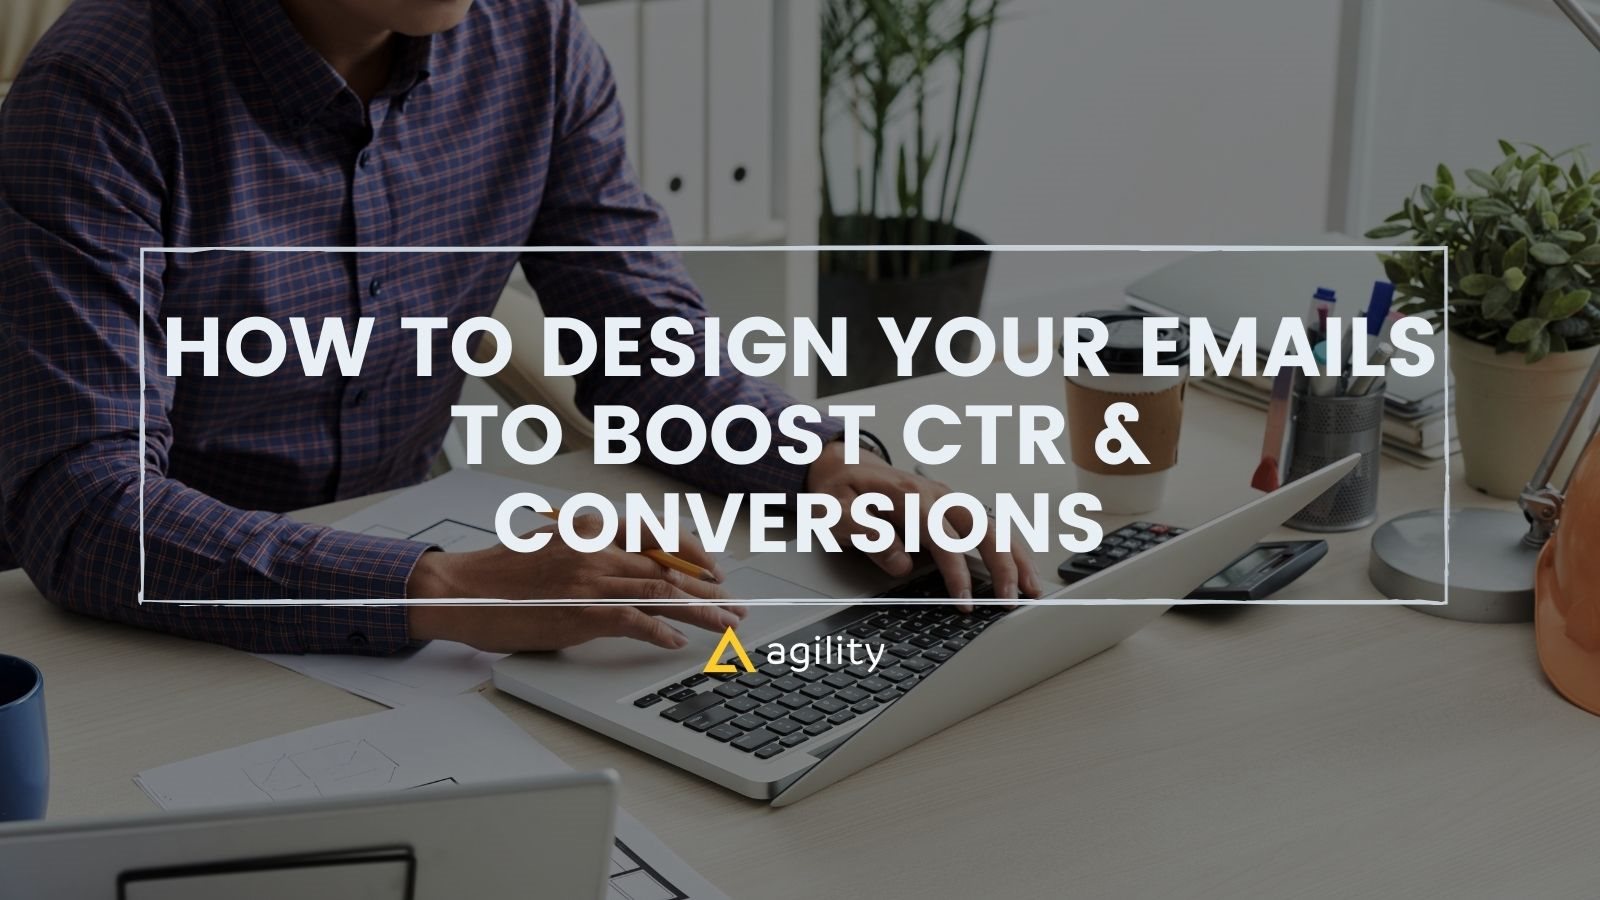 How to Design Your Emails to Boost CTR & Conversions